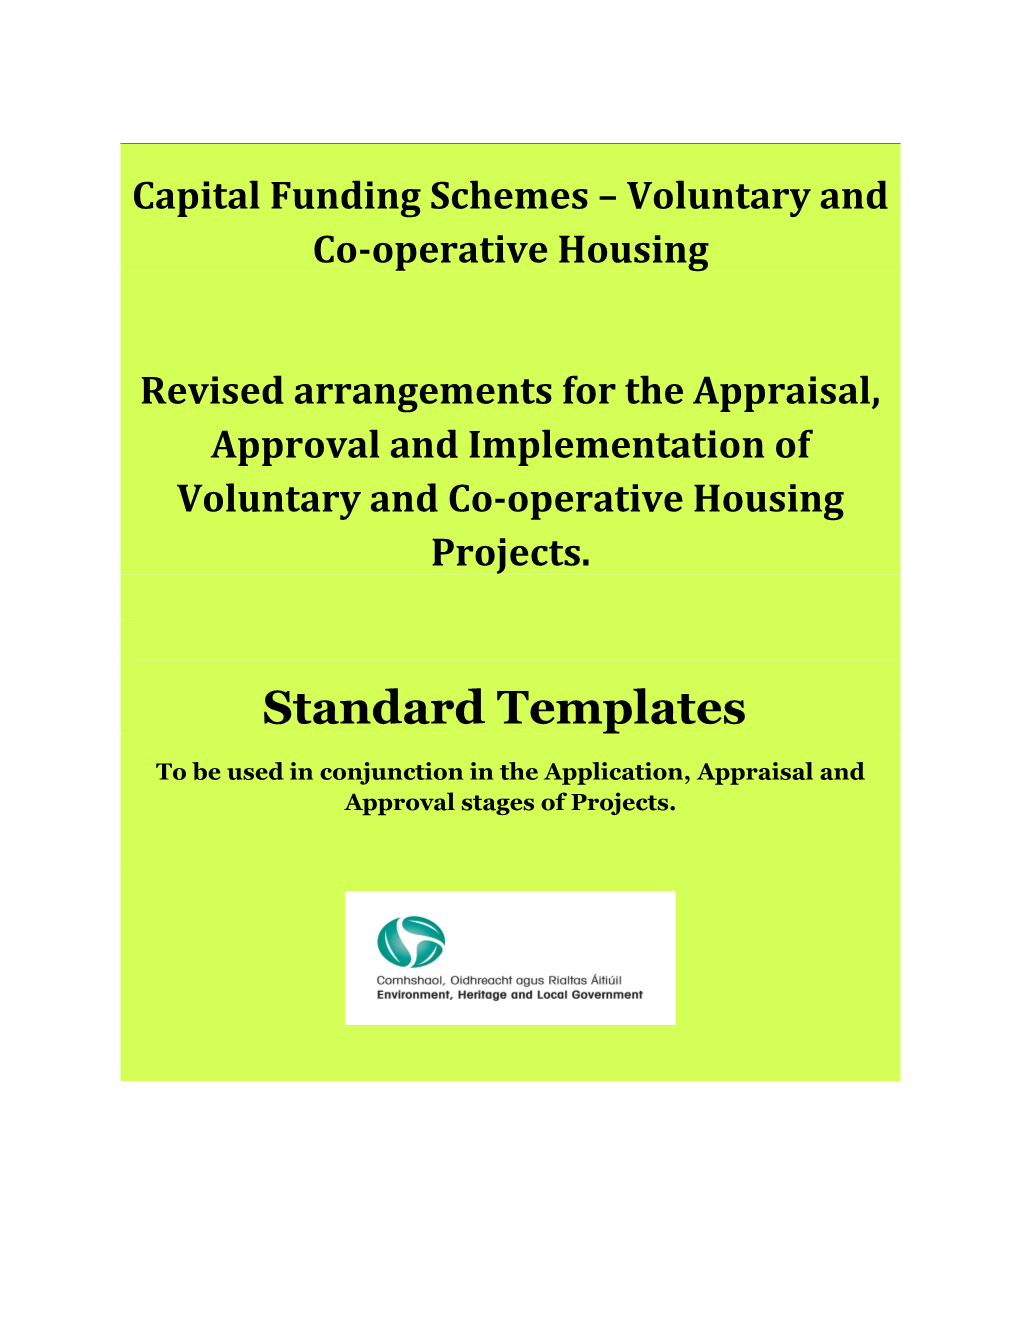 Capital Funding Schemes Voluntary and Co-Operative Housing